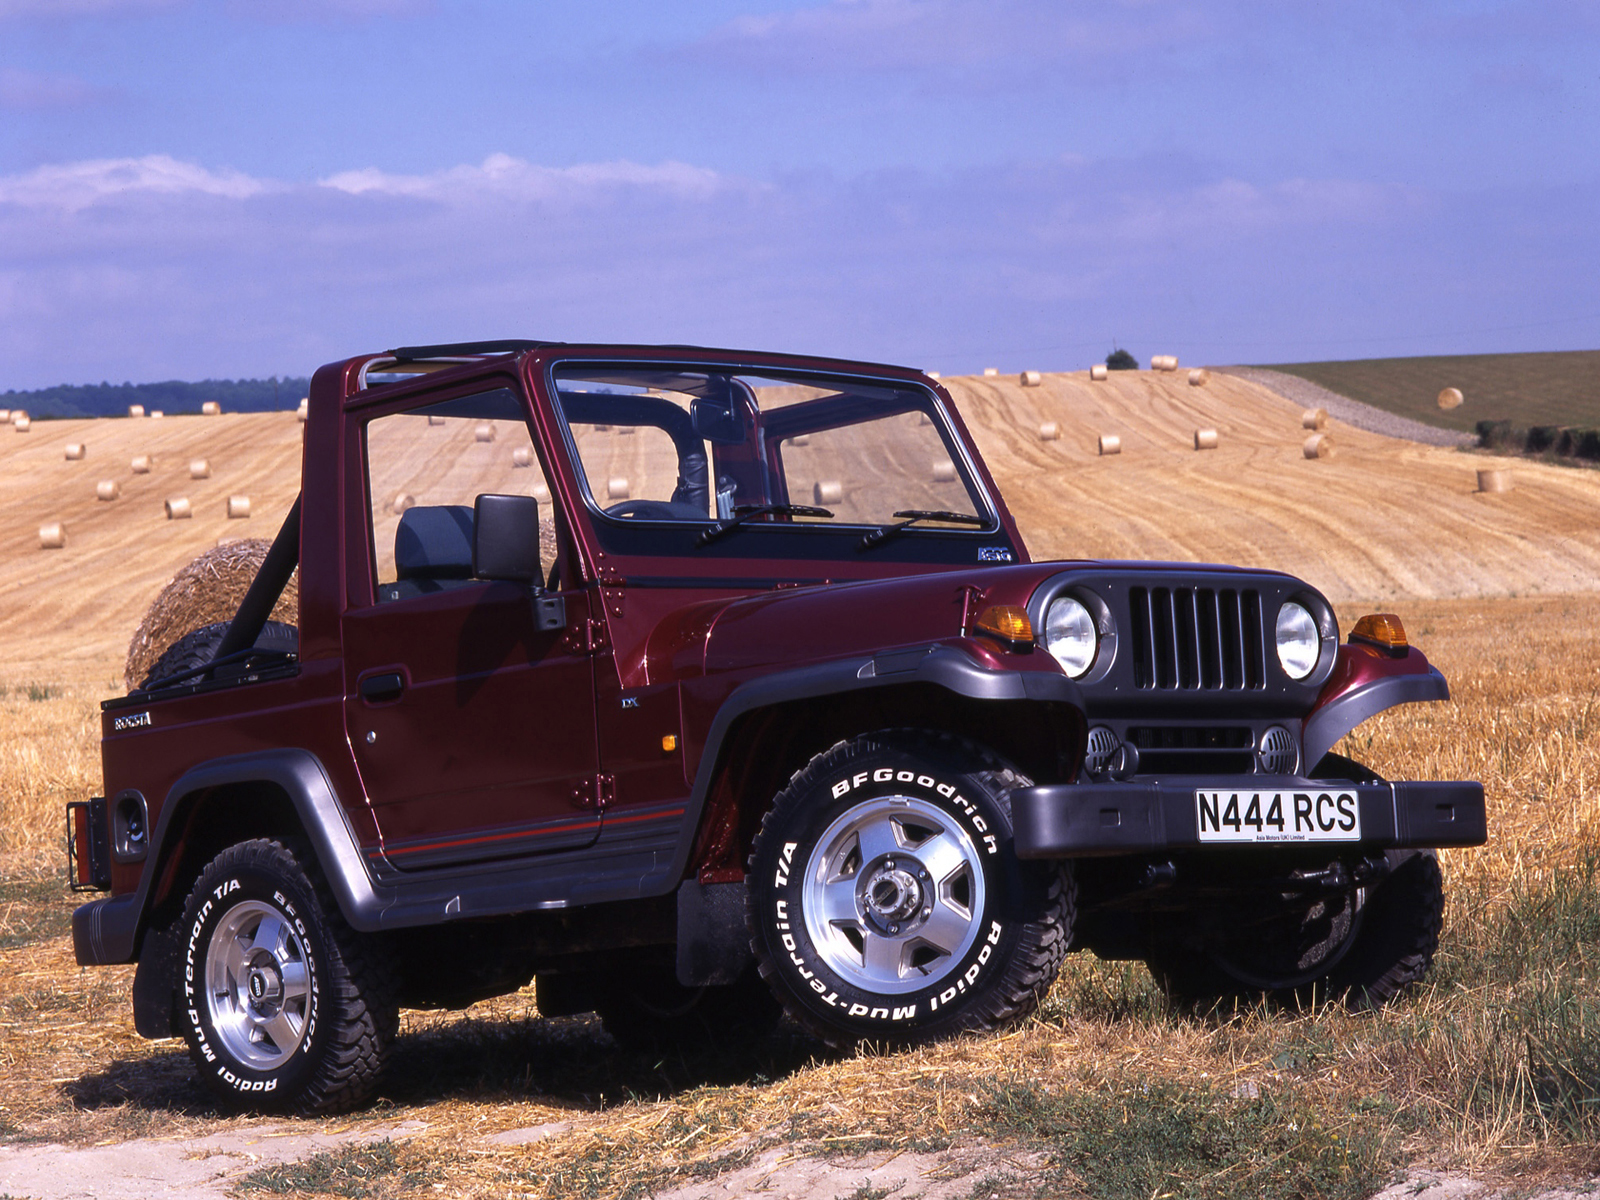 This 4x4 Isn't a Jeep, So What Is It?